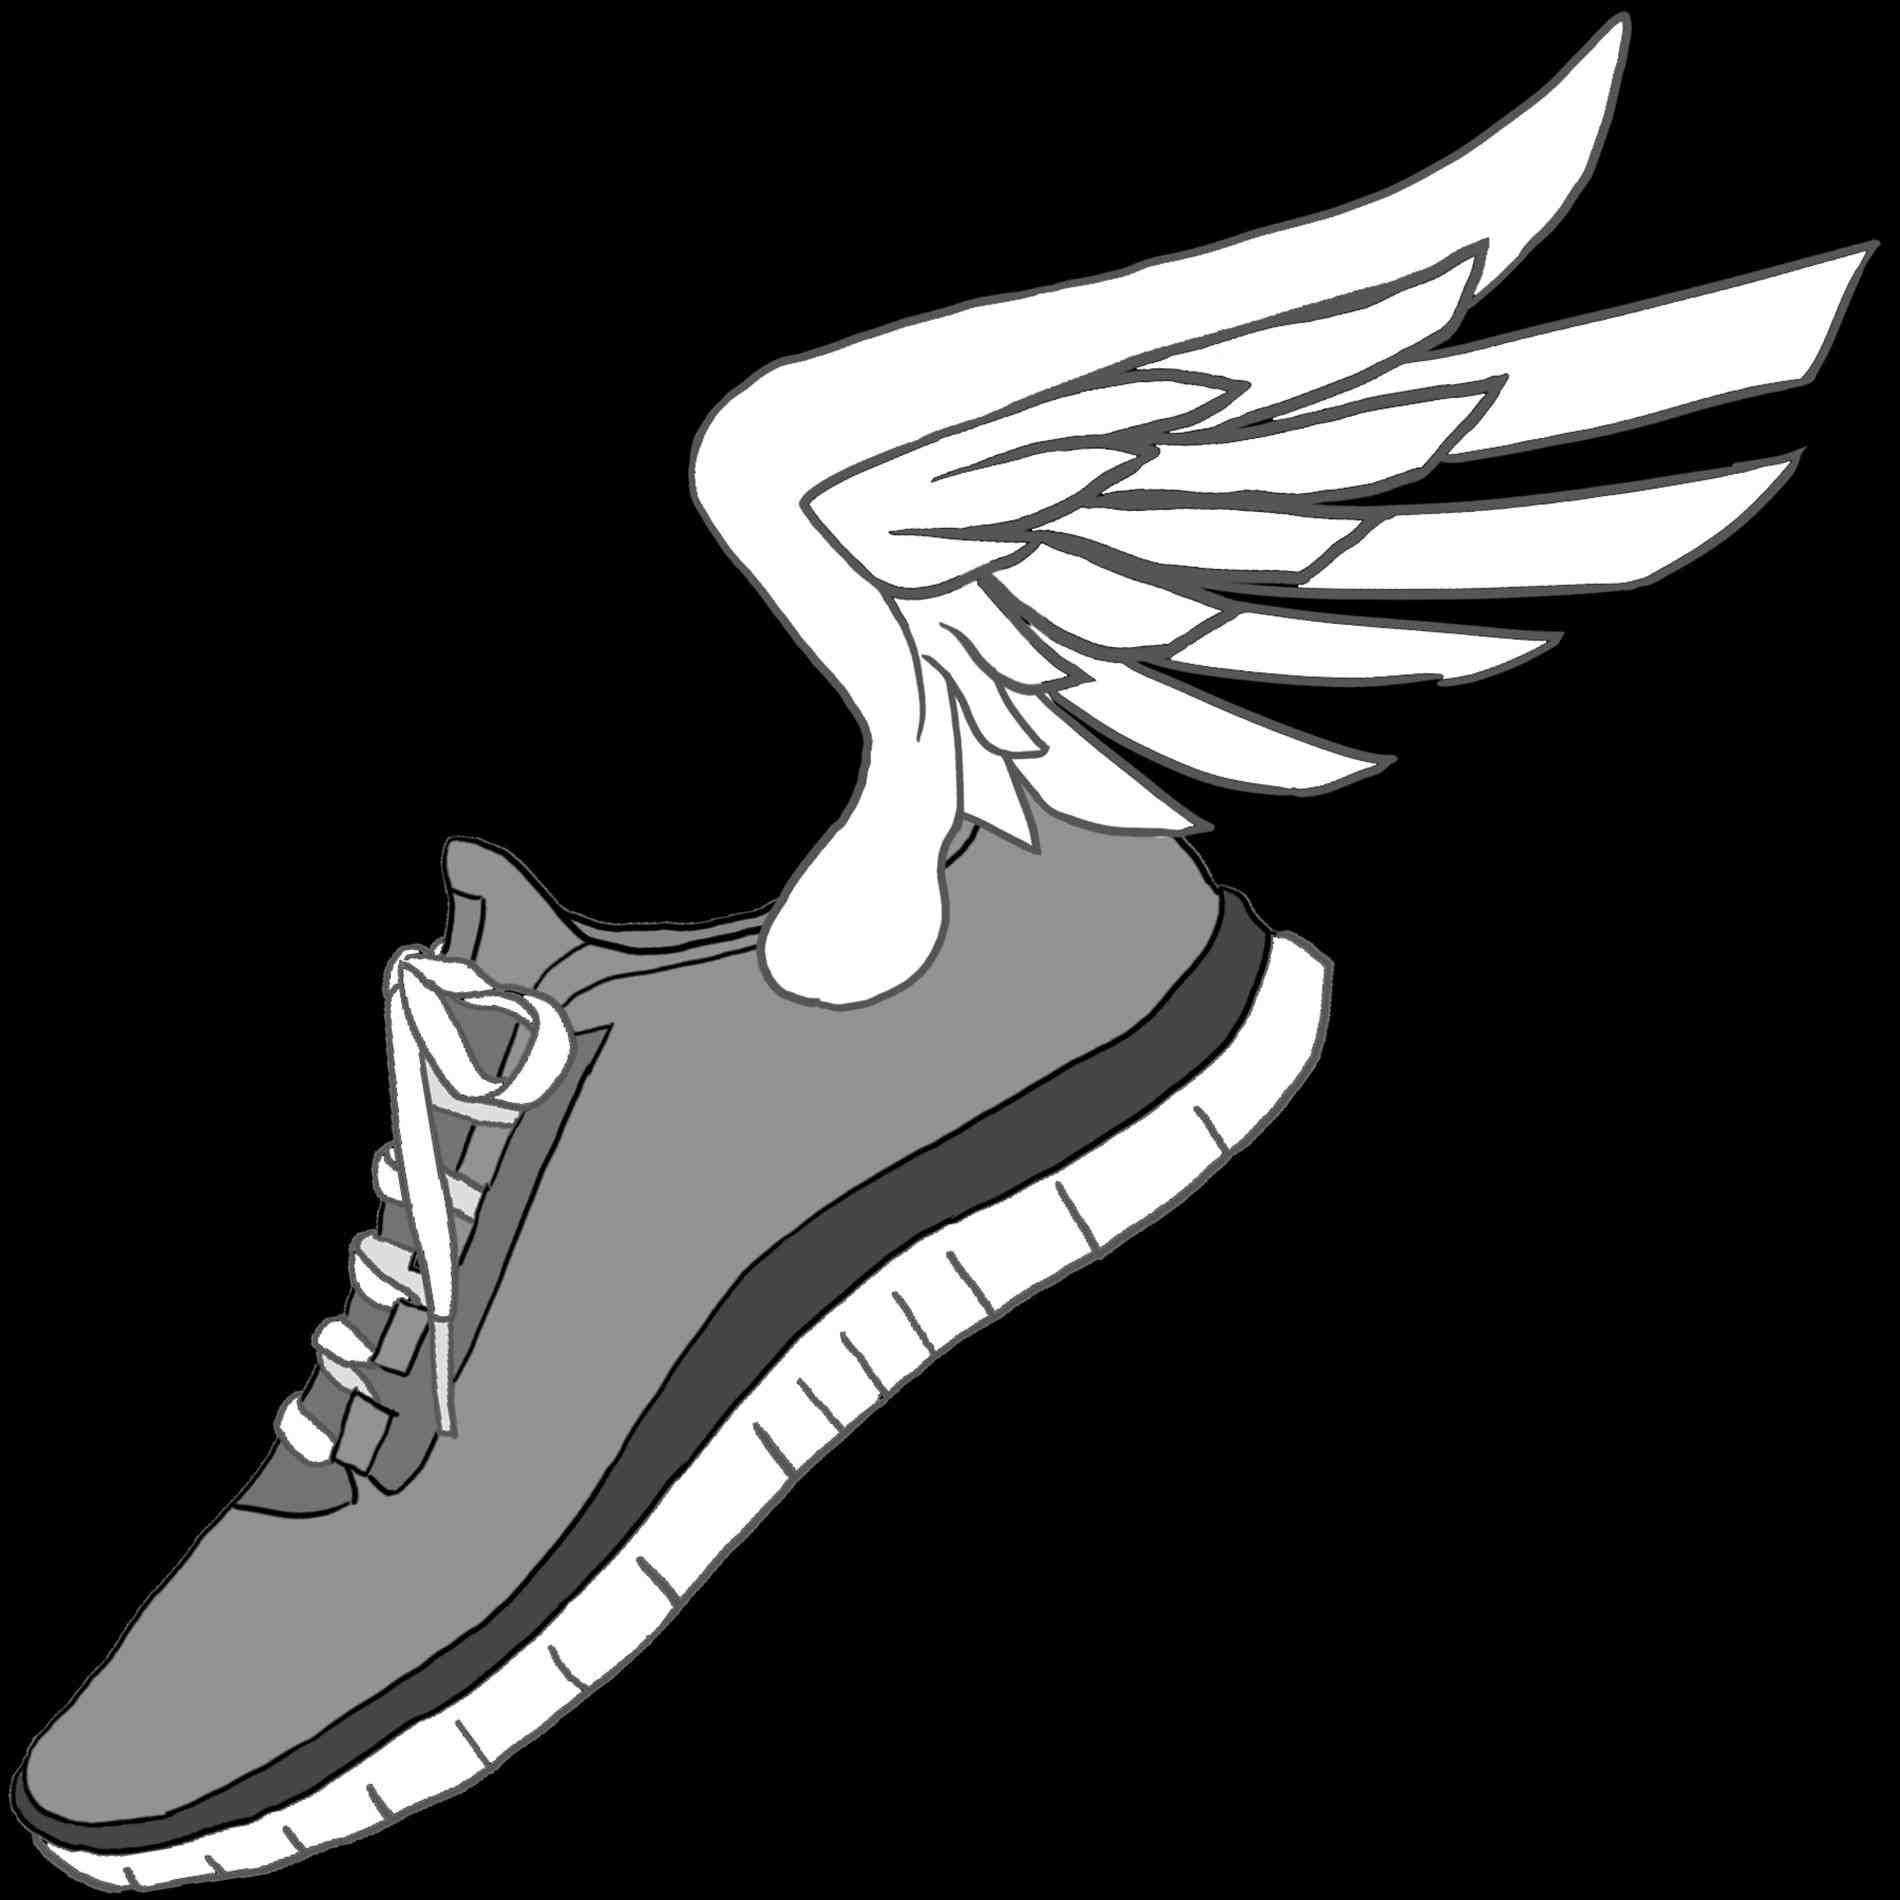 wings image wiki track running shoes clipart border shoe with wings clip  art image wiki png of u work png running.jpg